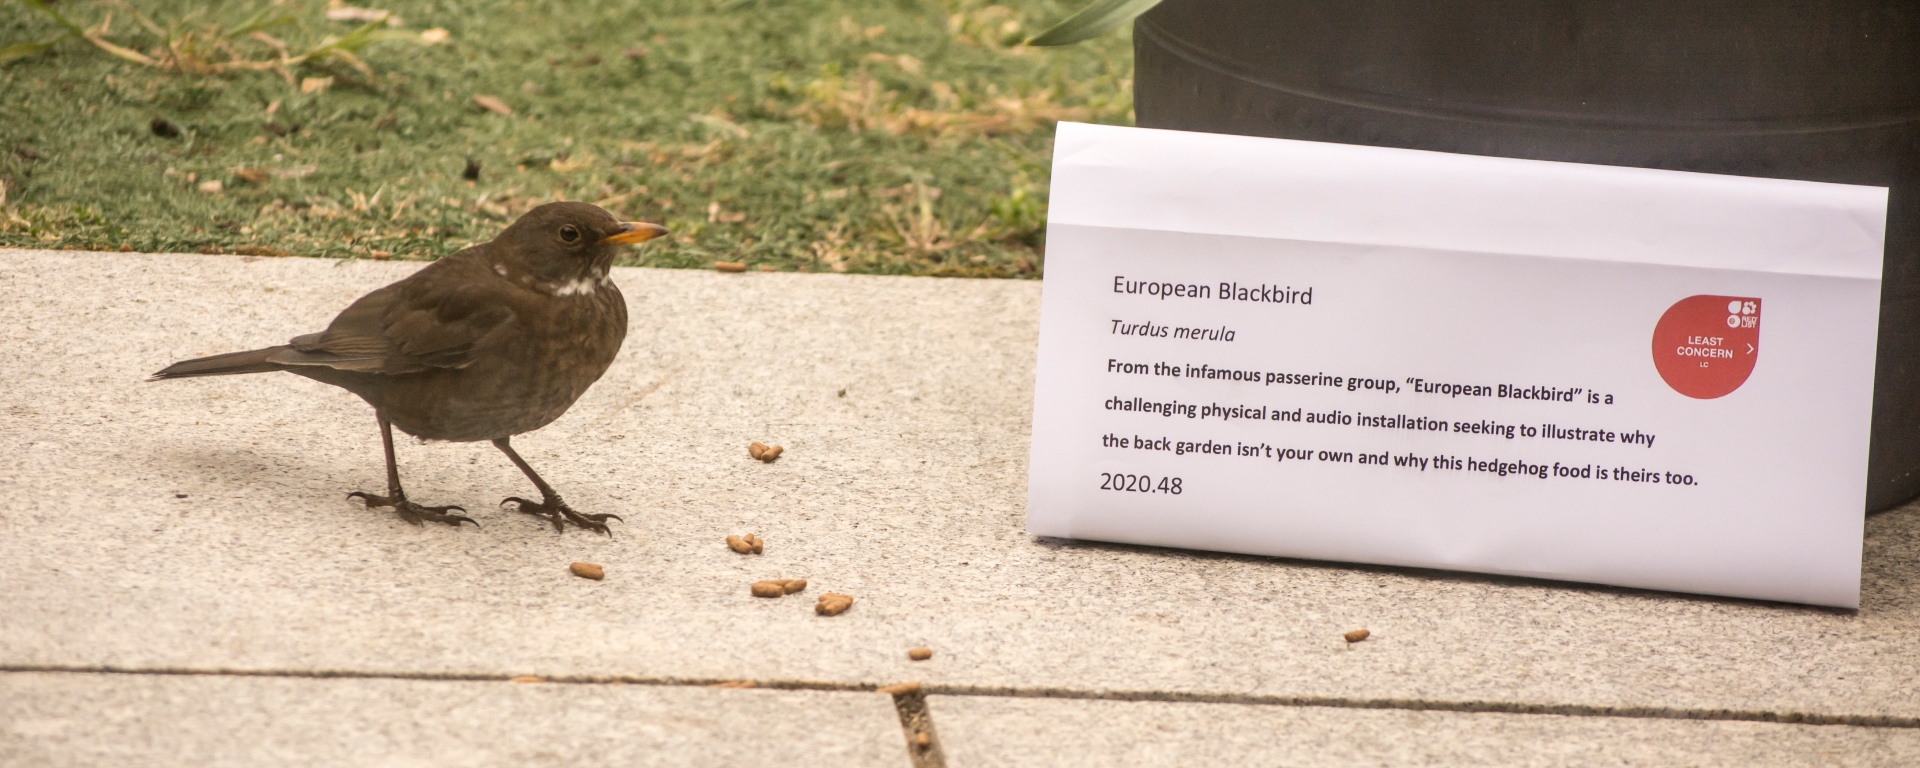 Blackbird next to a mocked-up museum label